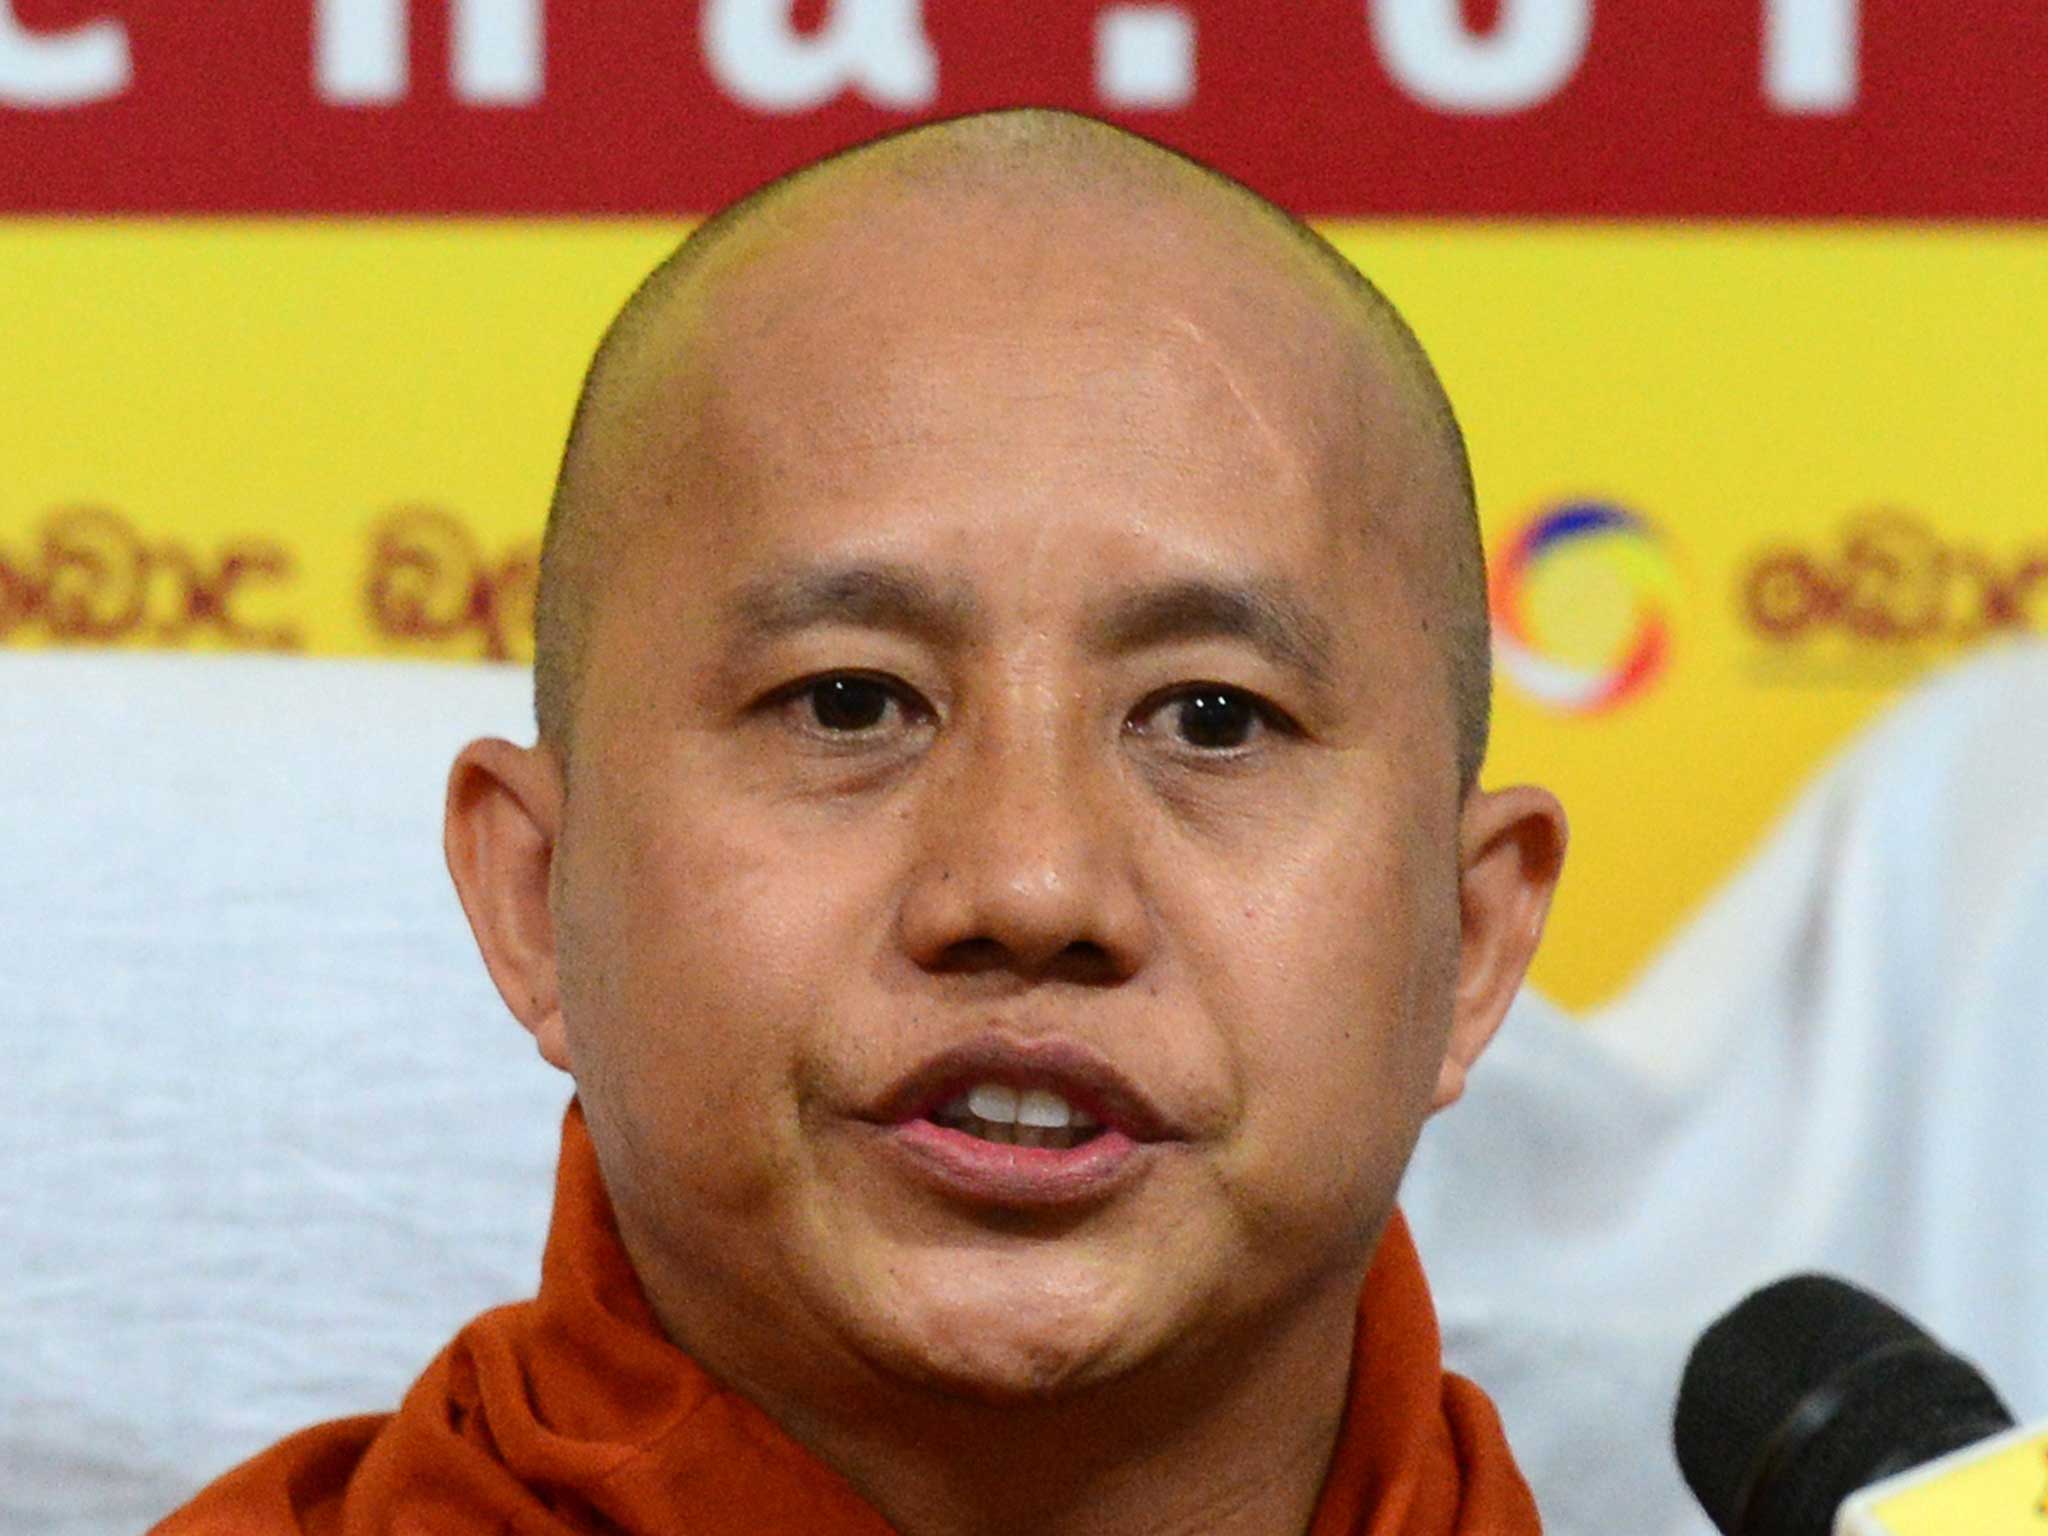 Ashin Wirathu was sentenced to 25 years for inciting anti-Muslim hatred but was released in 2010